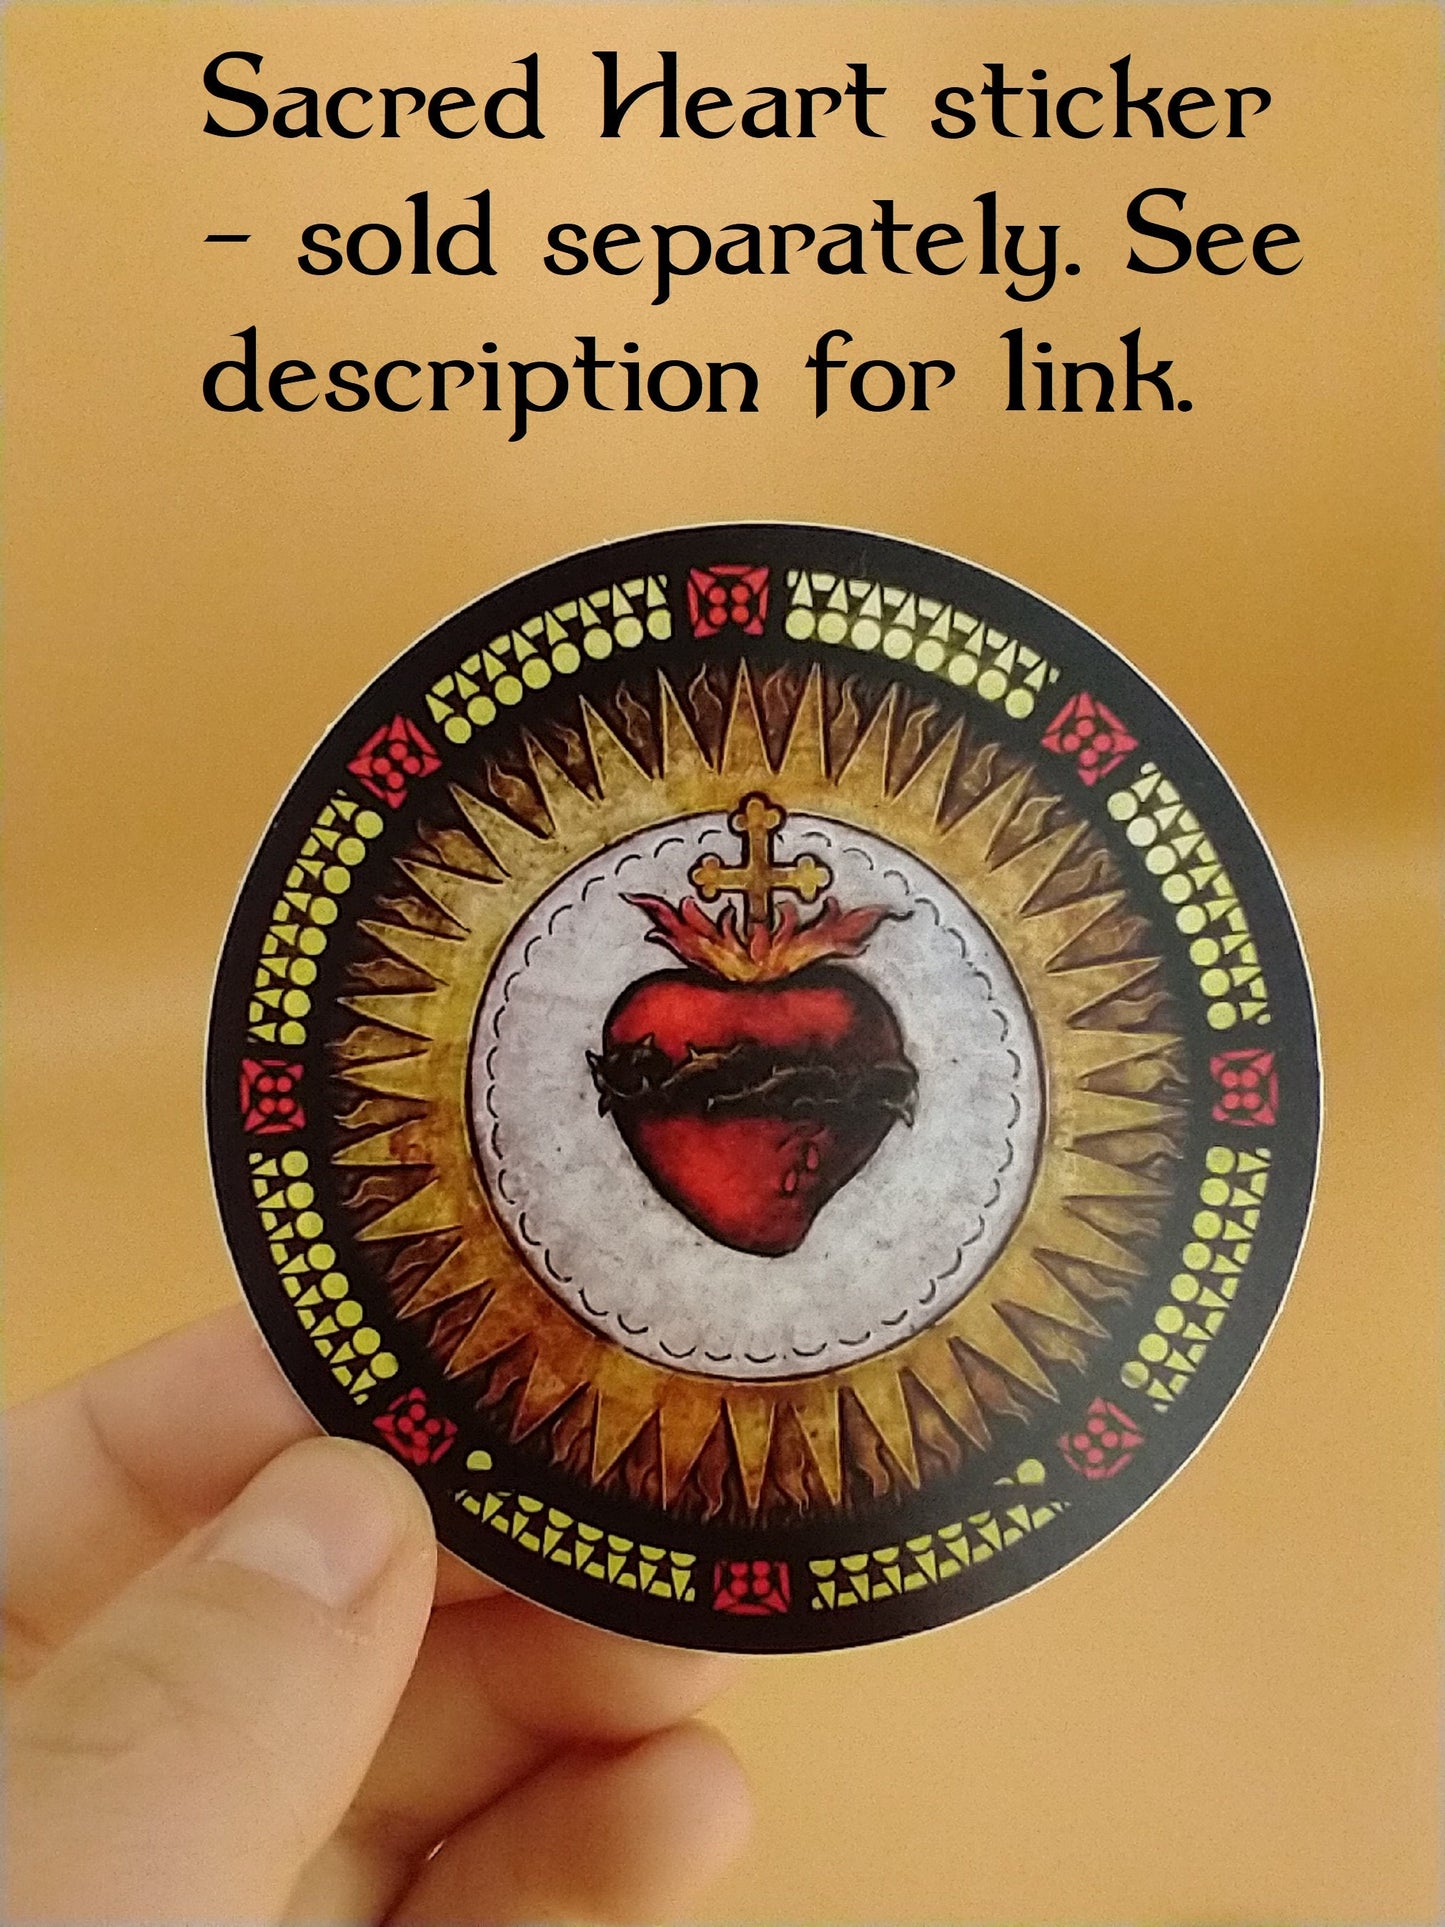 Sticker–Immaculate Heart of Mary–from Stained Glass – Catholic Sticker – High Quality Vinyl